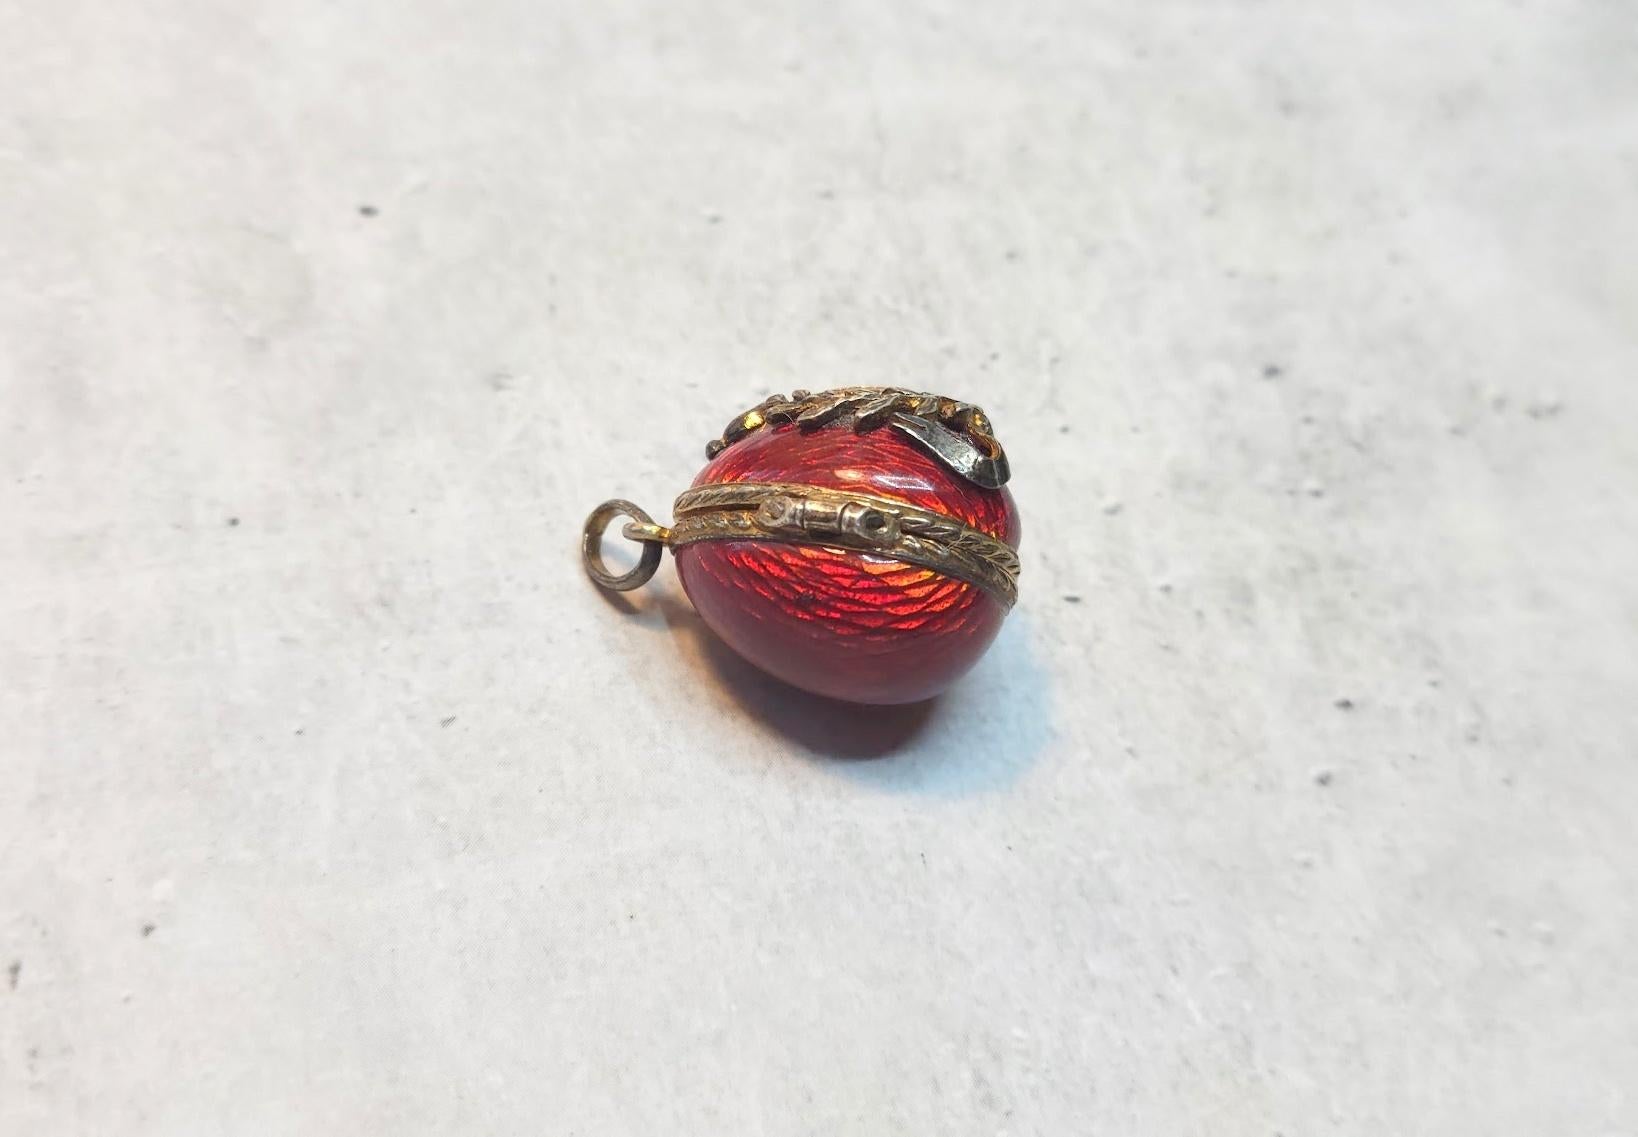 Presenting a stunning locket-pendant designed in the shape of a Russian Imperial gilt silver and guilloche enamel egg. The body of the egg is enameled in a deep, beautiful red guilloche enamel. The repeating patterns of the enamel look like hundreds